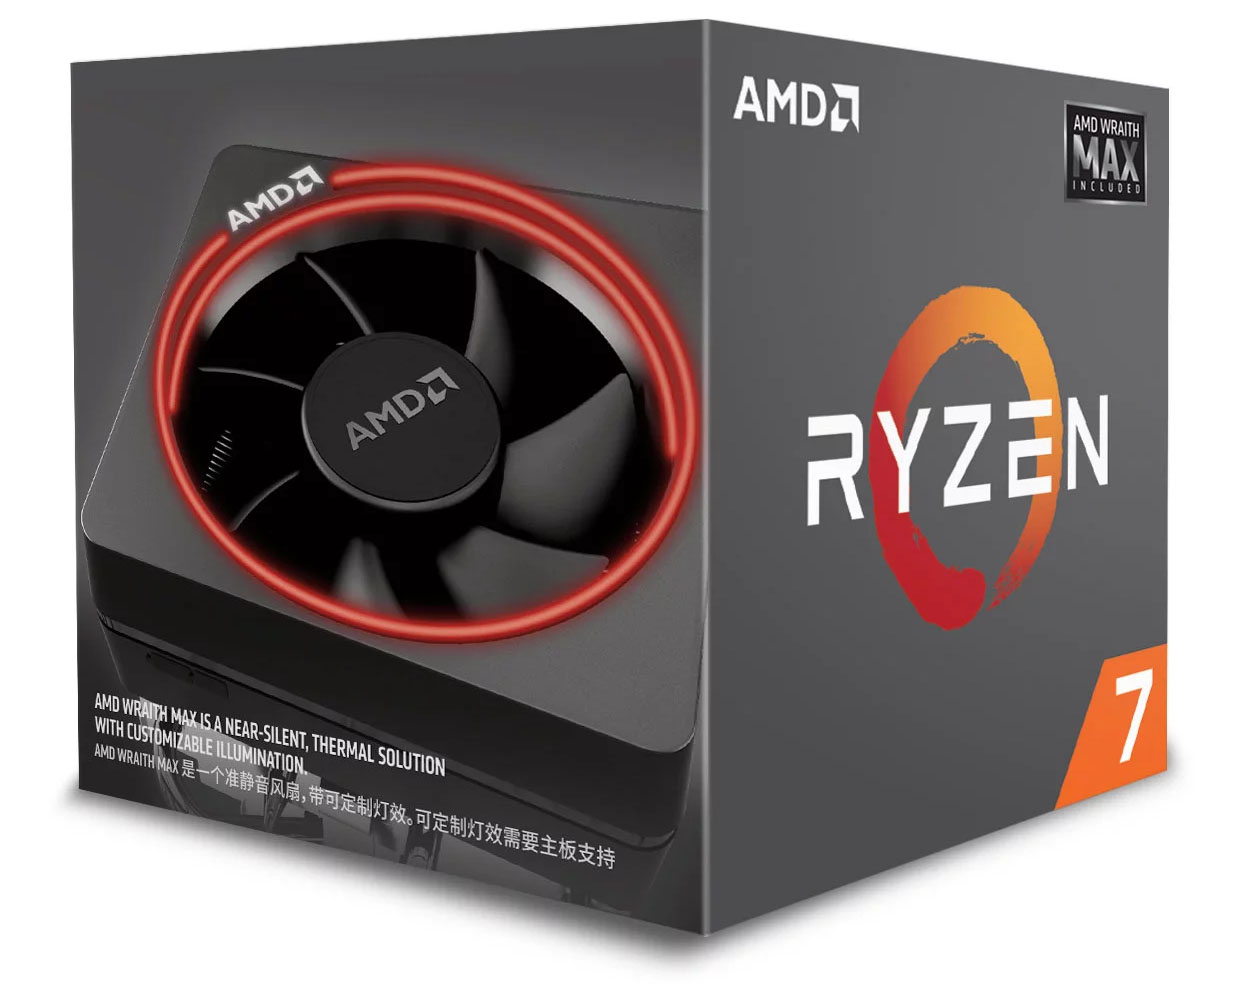 AMD Releases Ryzen 5 2600X And Ryzen 7 2700 With Wraith MAX Cooler In